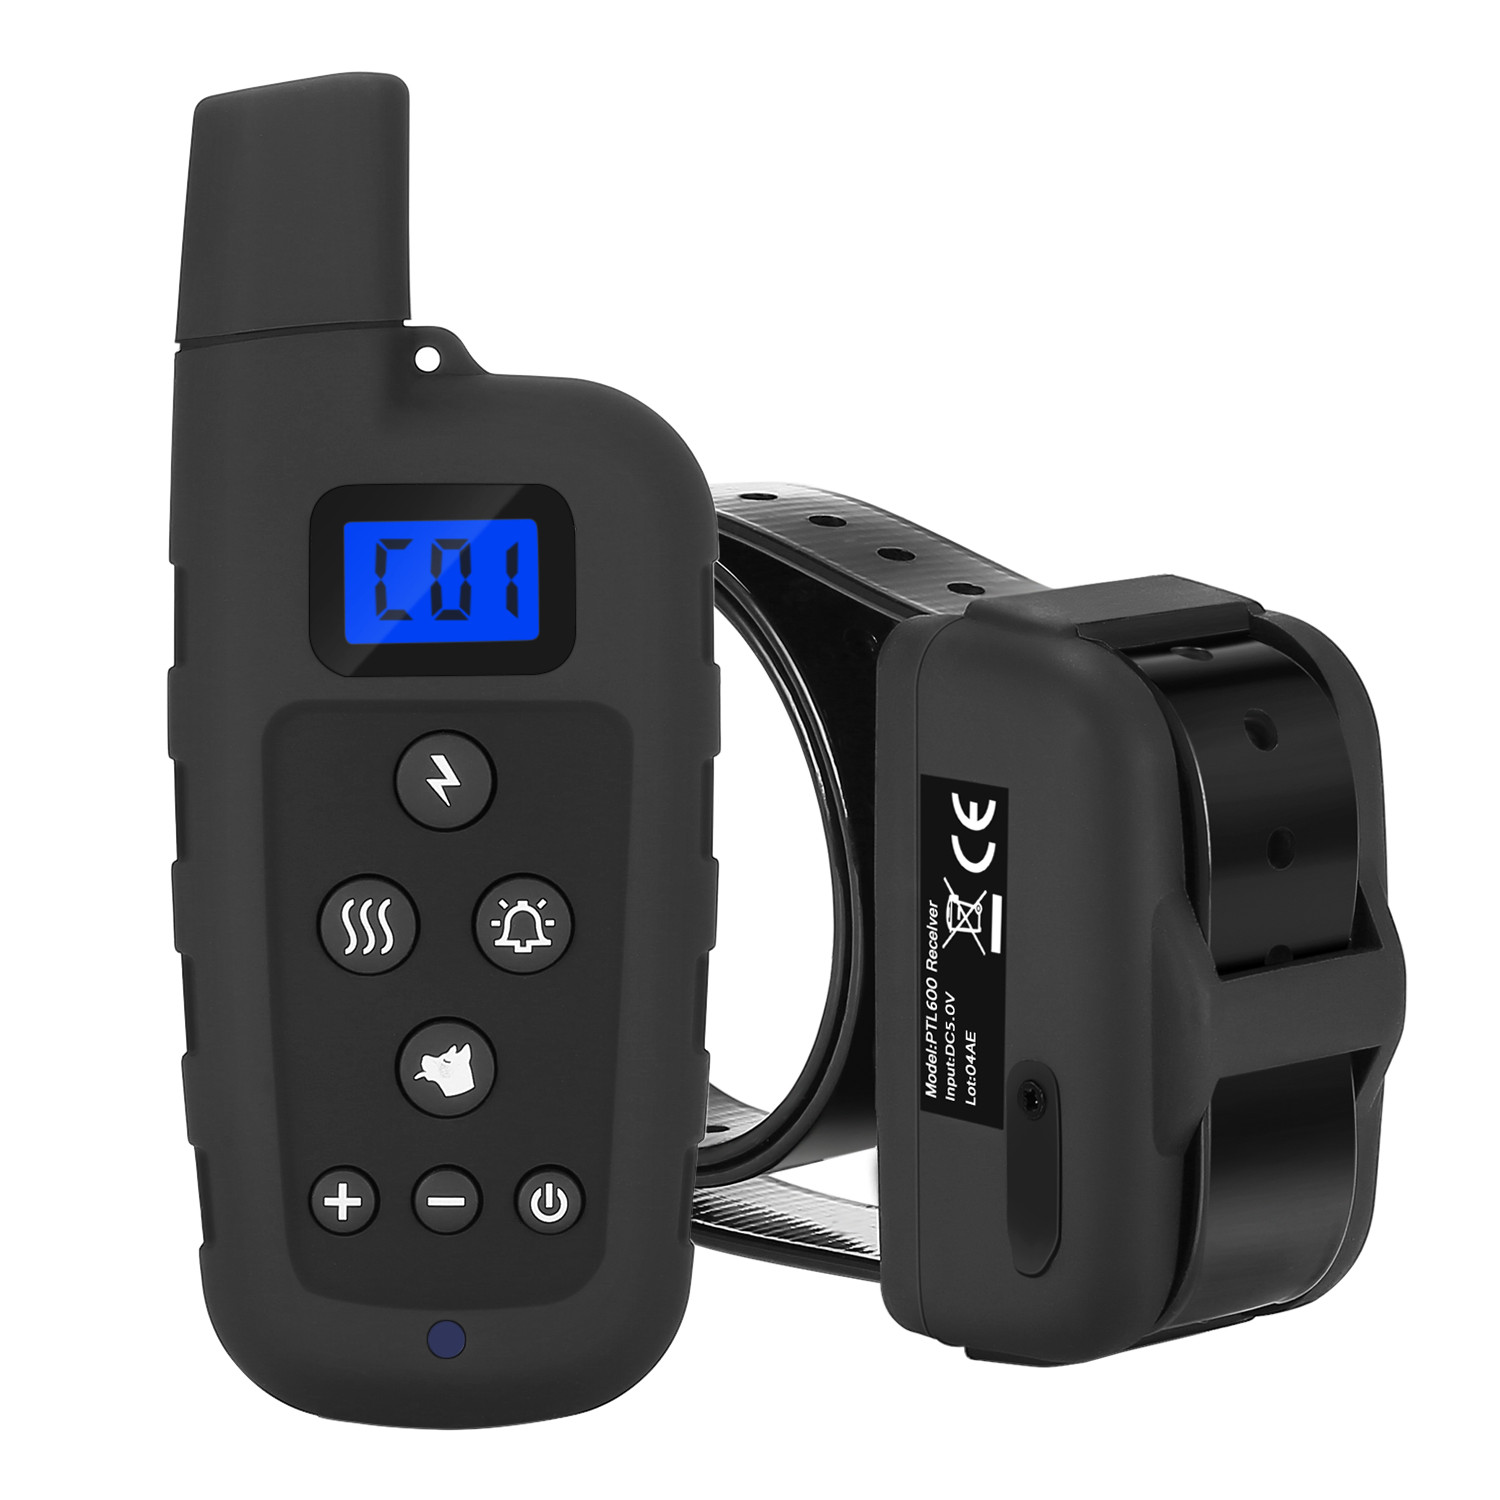 Buy 600 Meters Remote Dog Training E-collar with Beep/Vibration/Shock Electric Submersible train up to 3 dogs at wholesale prices